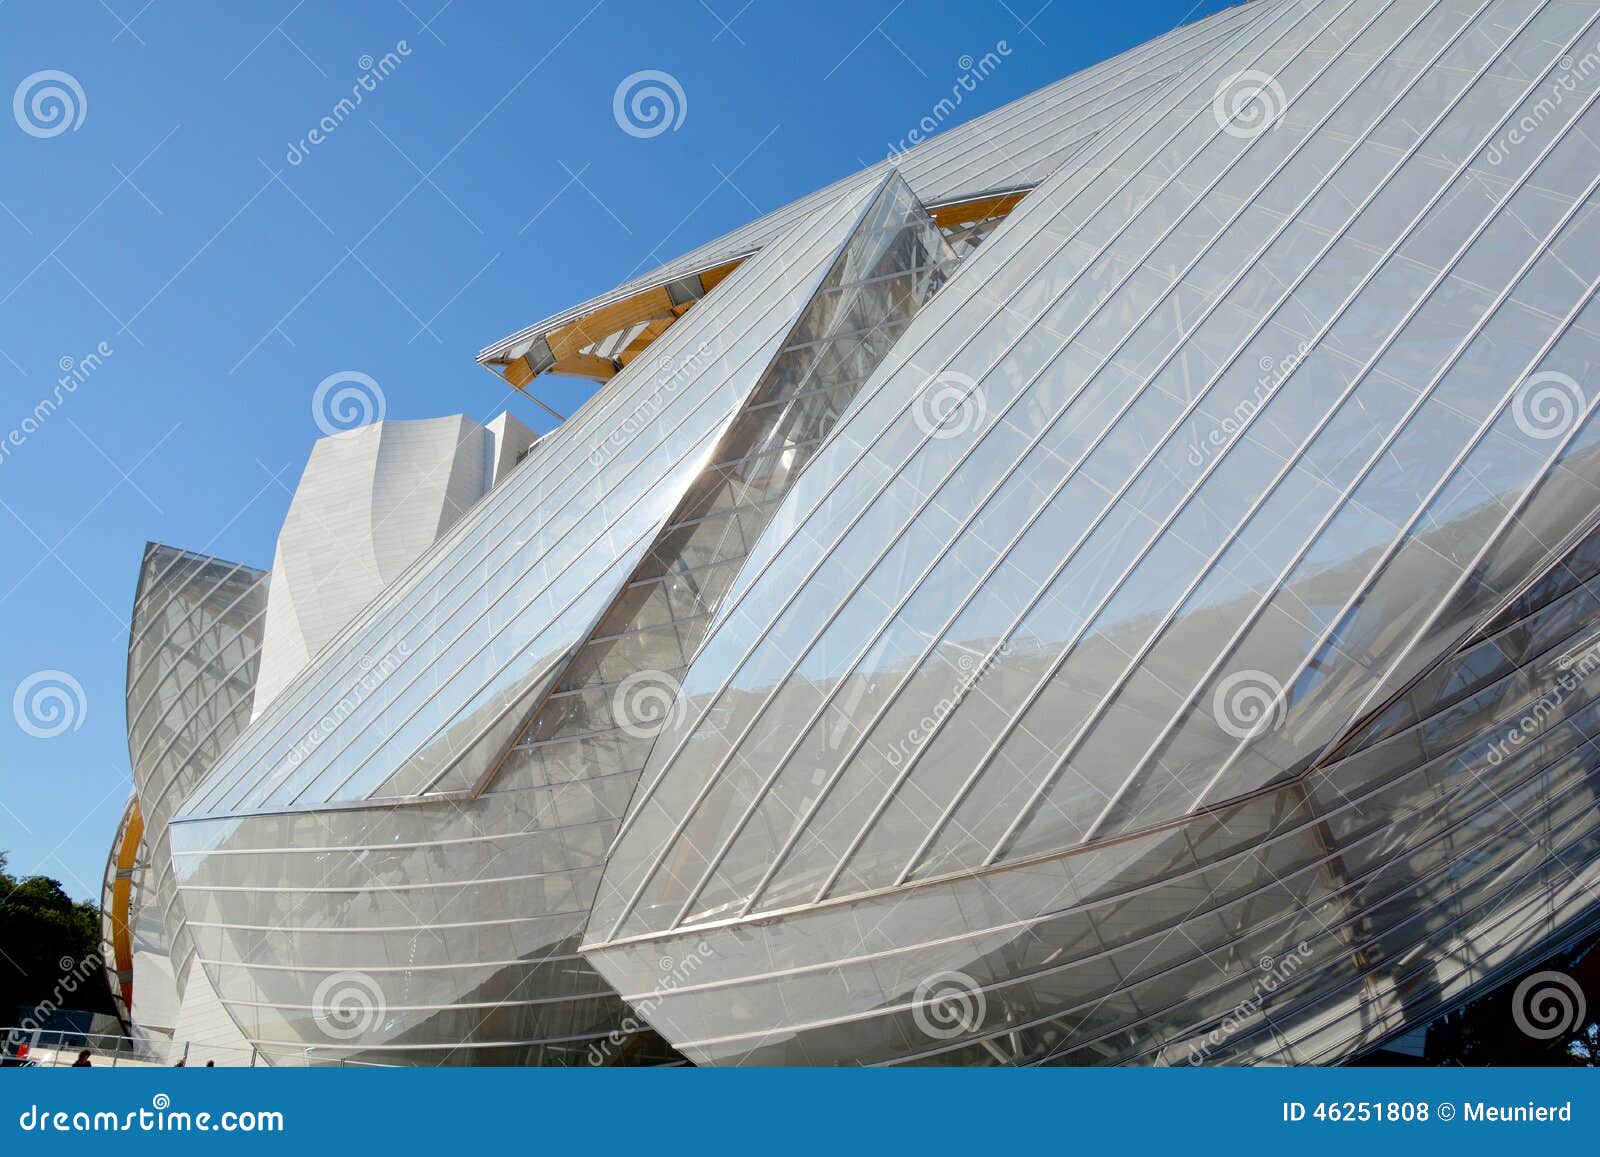 Louis Vuitton Foundation editorial stock photo. Image of brand - 46251808